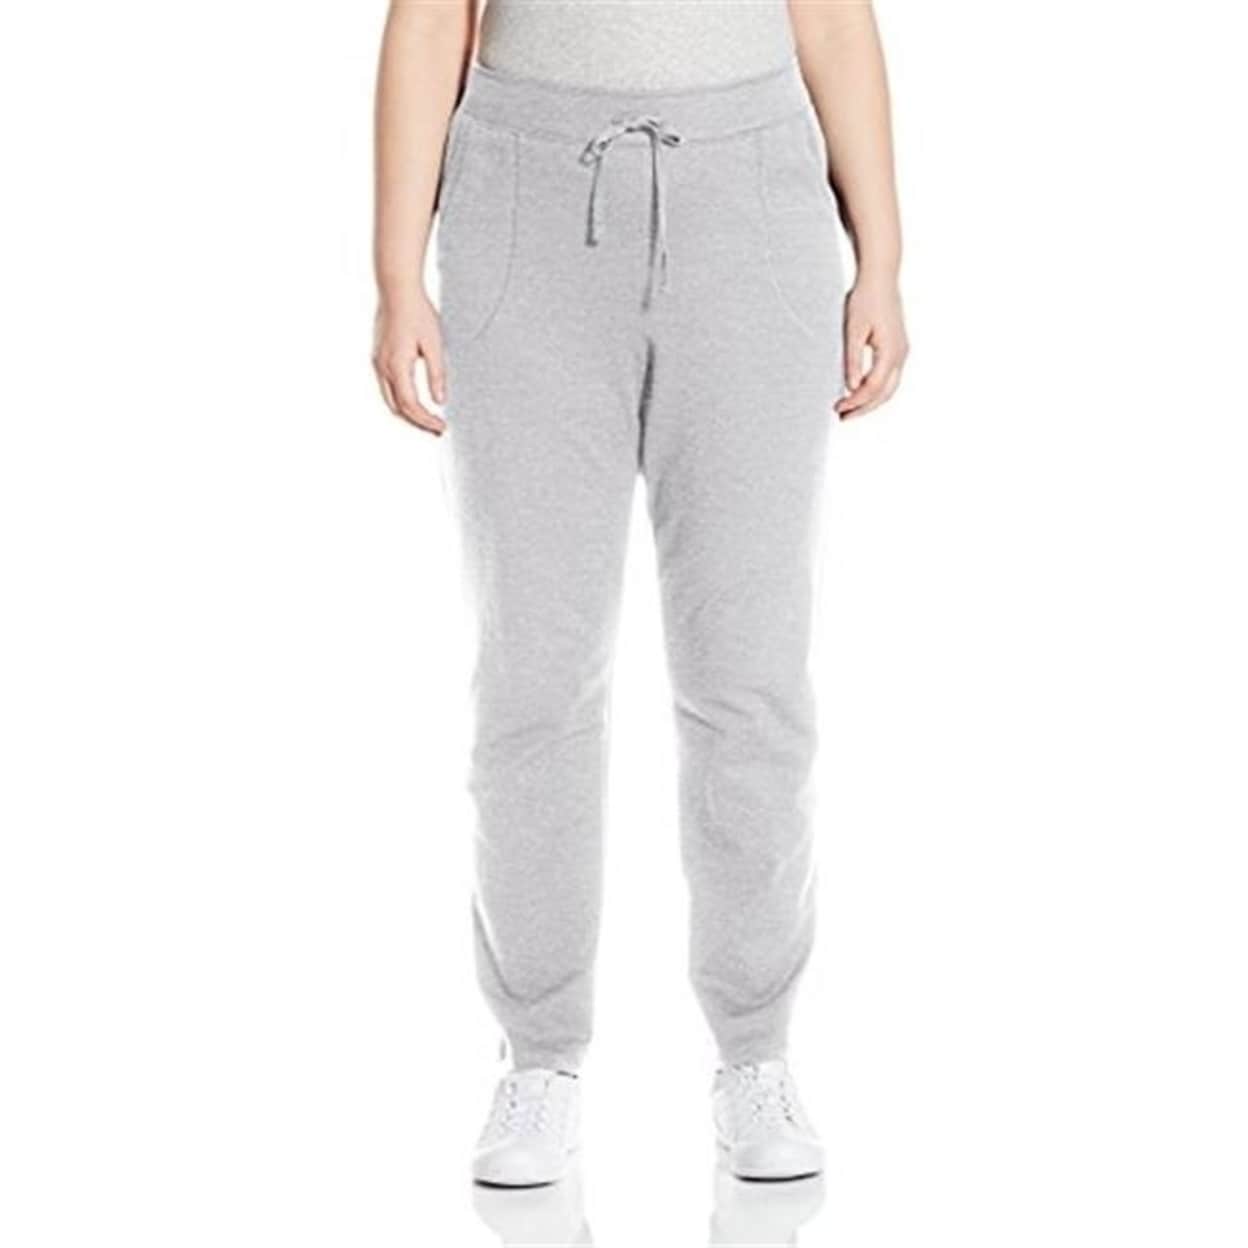 Just My Size Womens Active French Terry Pant with Pockets Sweatpants